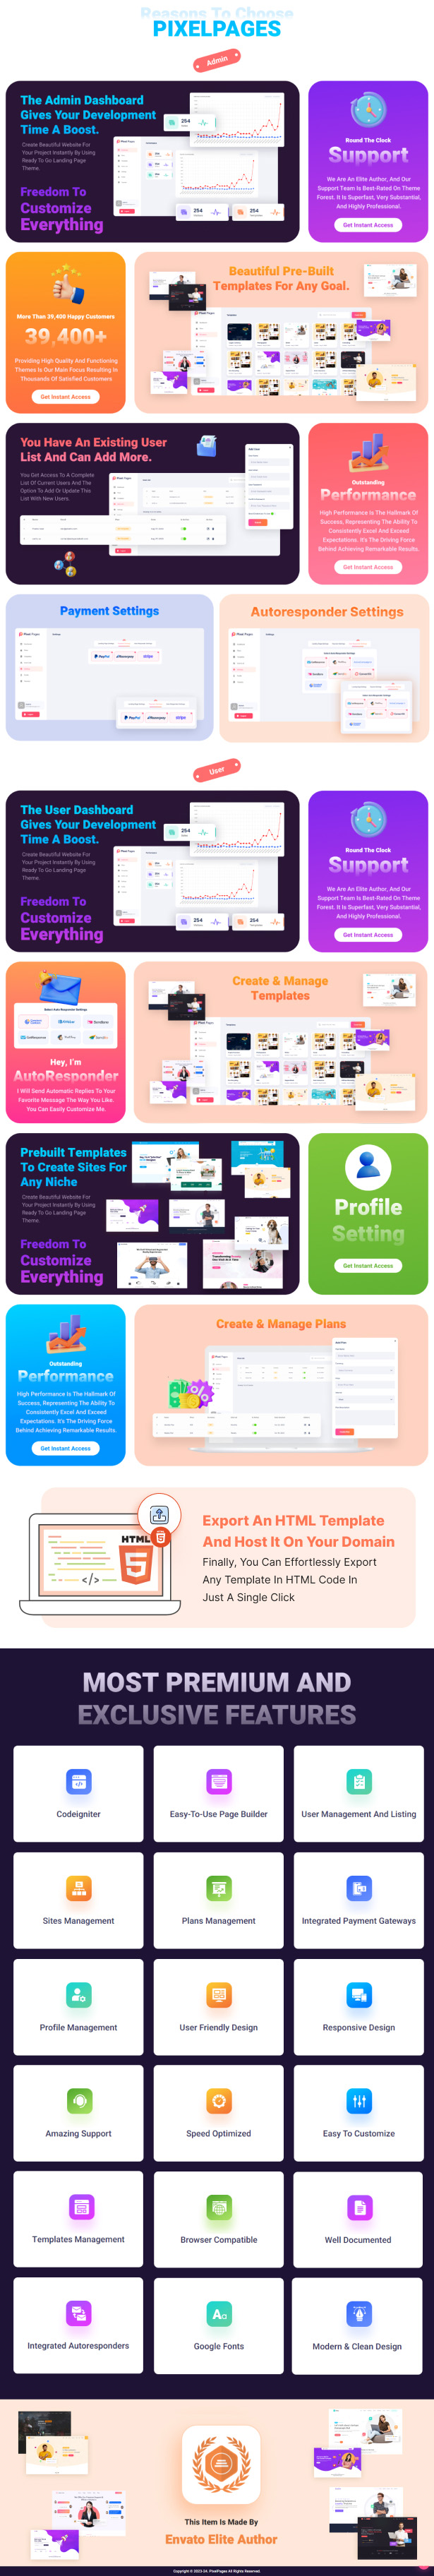 PixelPages - SAAS Application Website Builder for HTML Template - 4